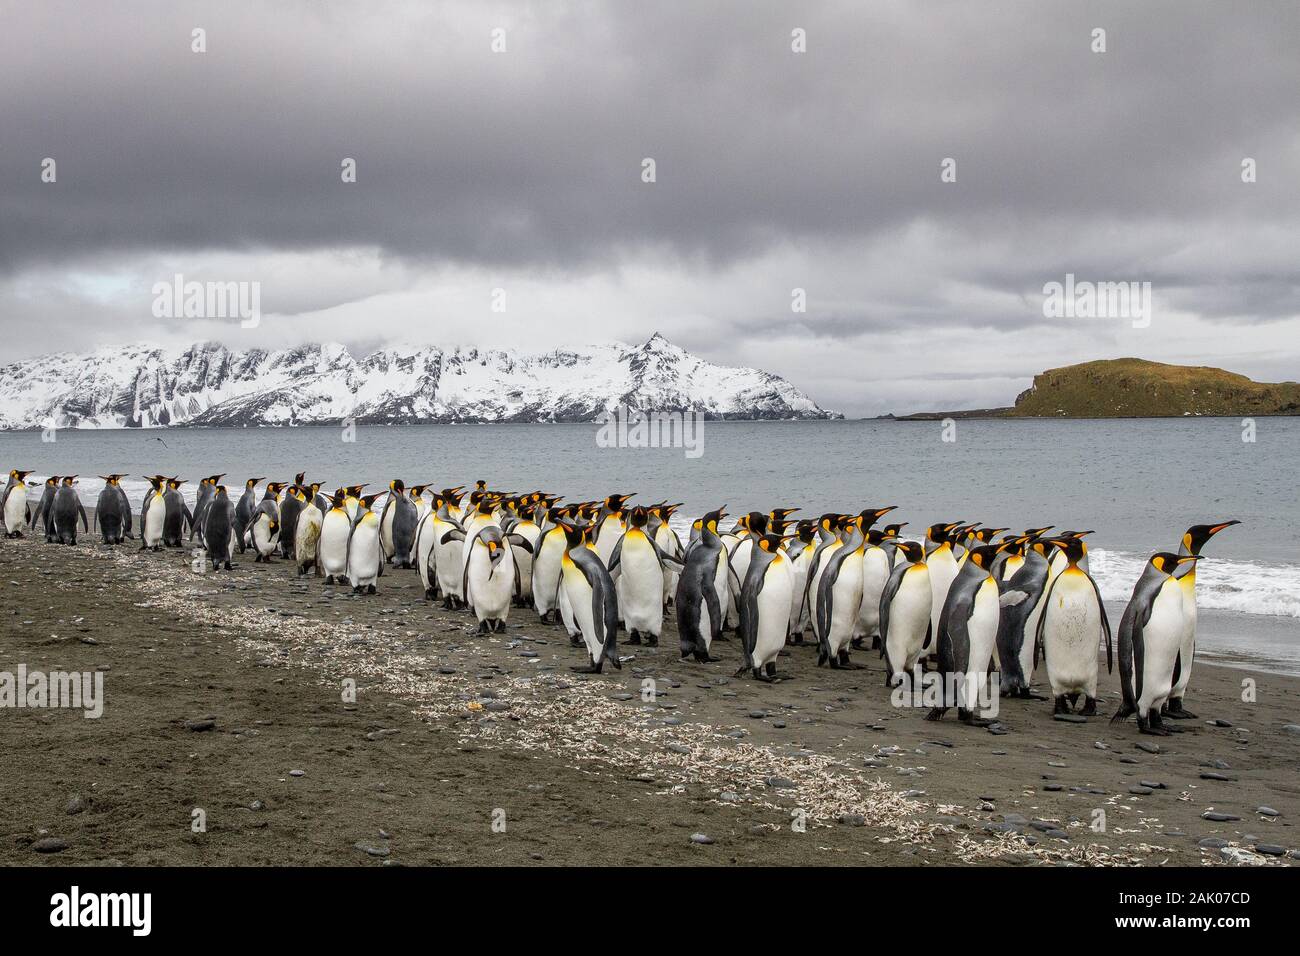 King Penguins returning from the sea in the surf, Salisbury Plain, South Georgia, Antarctica Stock Photo